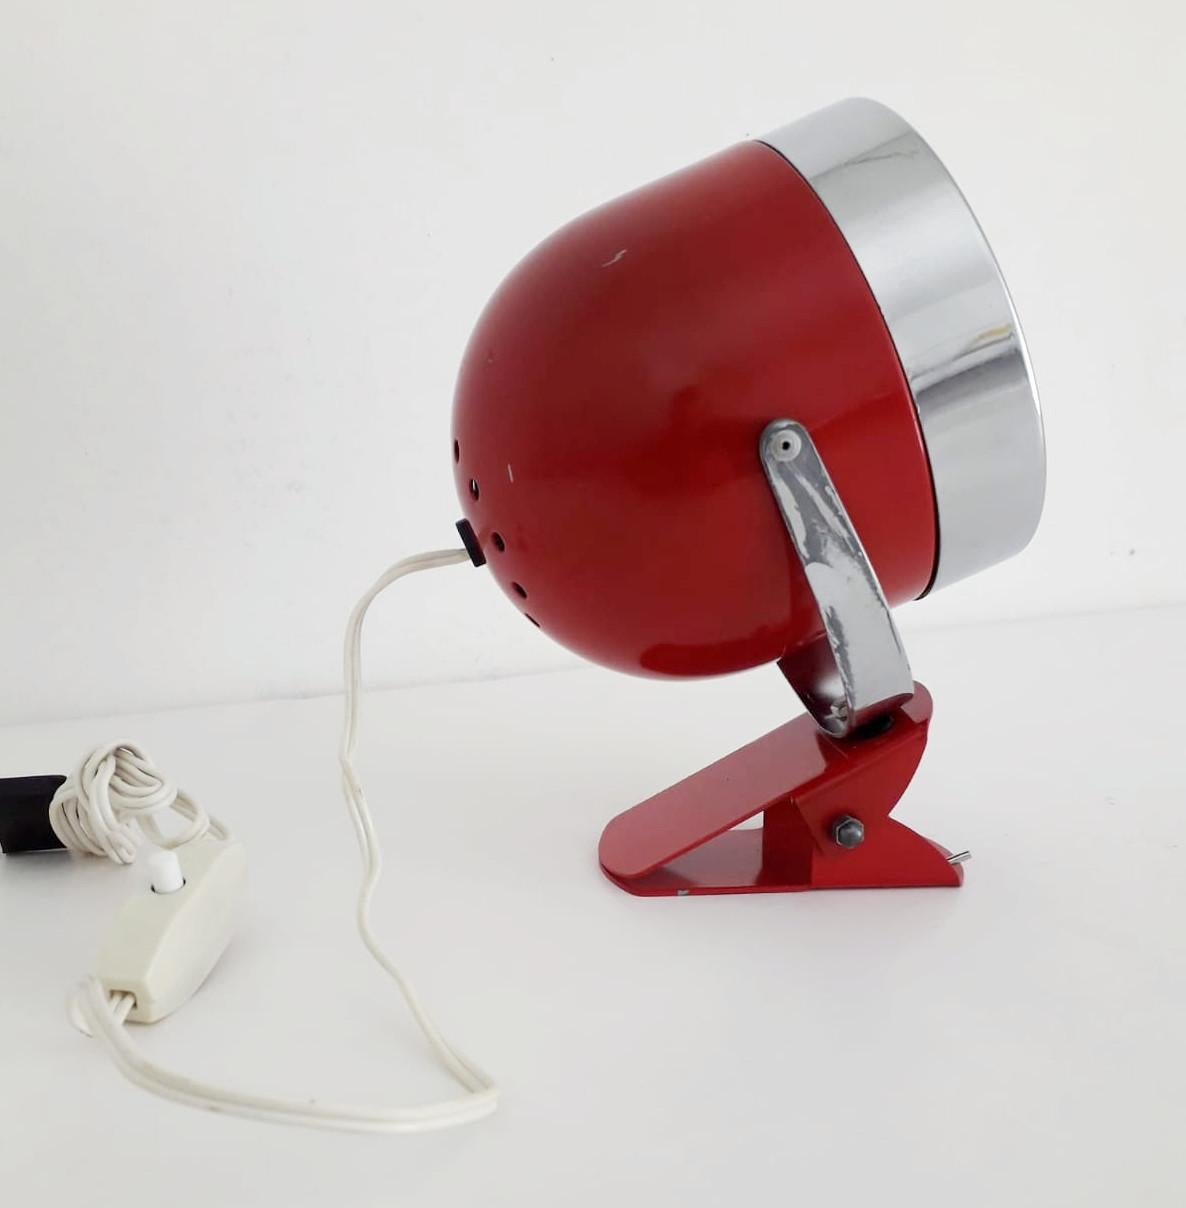 Vintage Italian adjustable spotlight with glossy red enameled body and chrome hardware, mounted with simple clip base, can be used as wall light or table lamp / Made in Italy circa 1970s
1 light / E14 type / max 40W
Measures: Height 7 inches / width